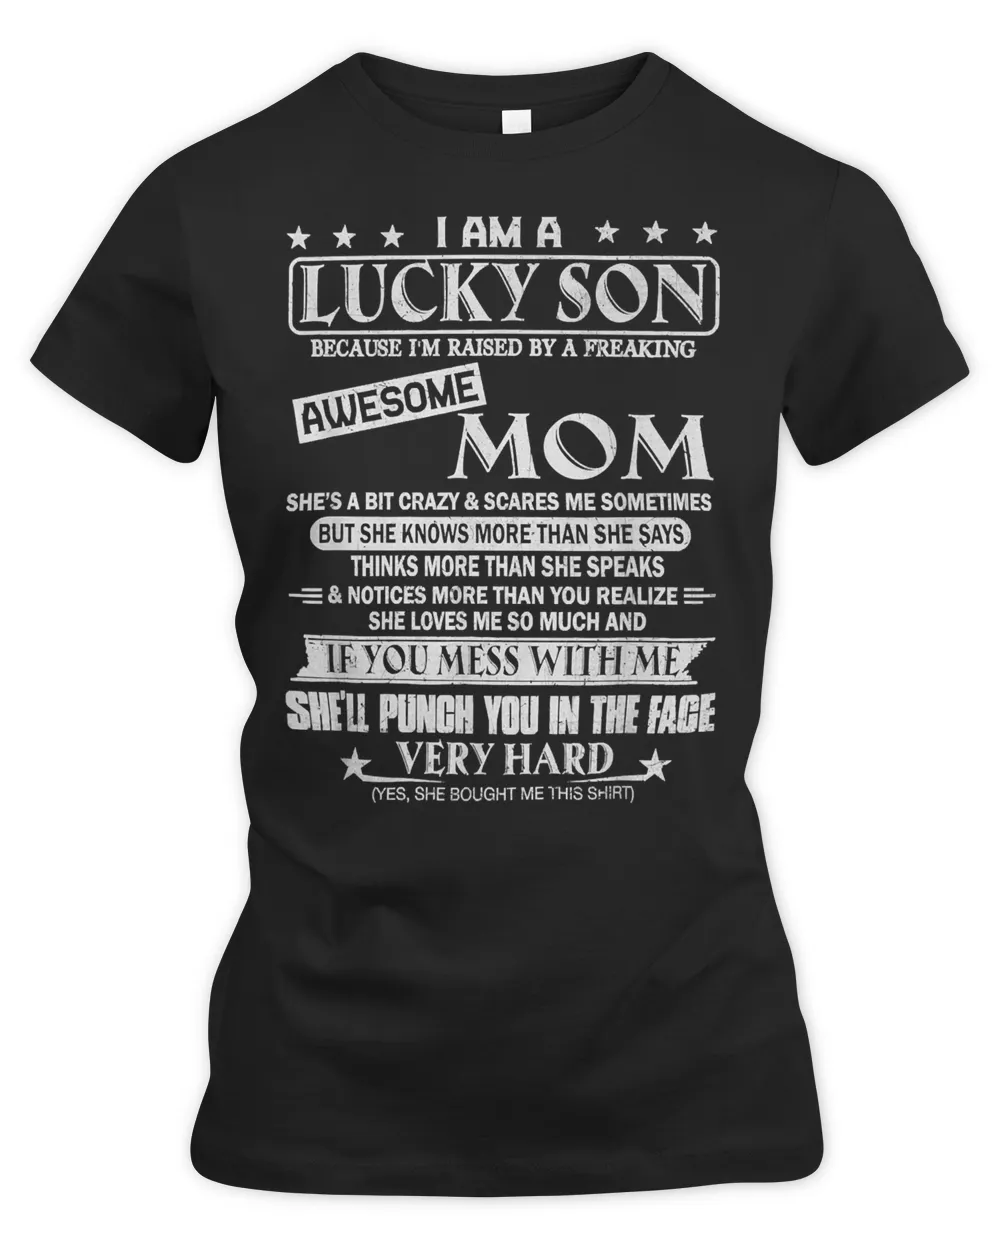 I Am A Lucky Son I'm Raised By A Freaking Awesome Mom 1097 T-Shirt